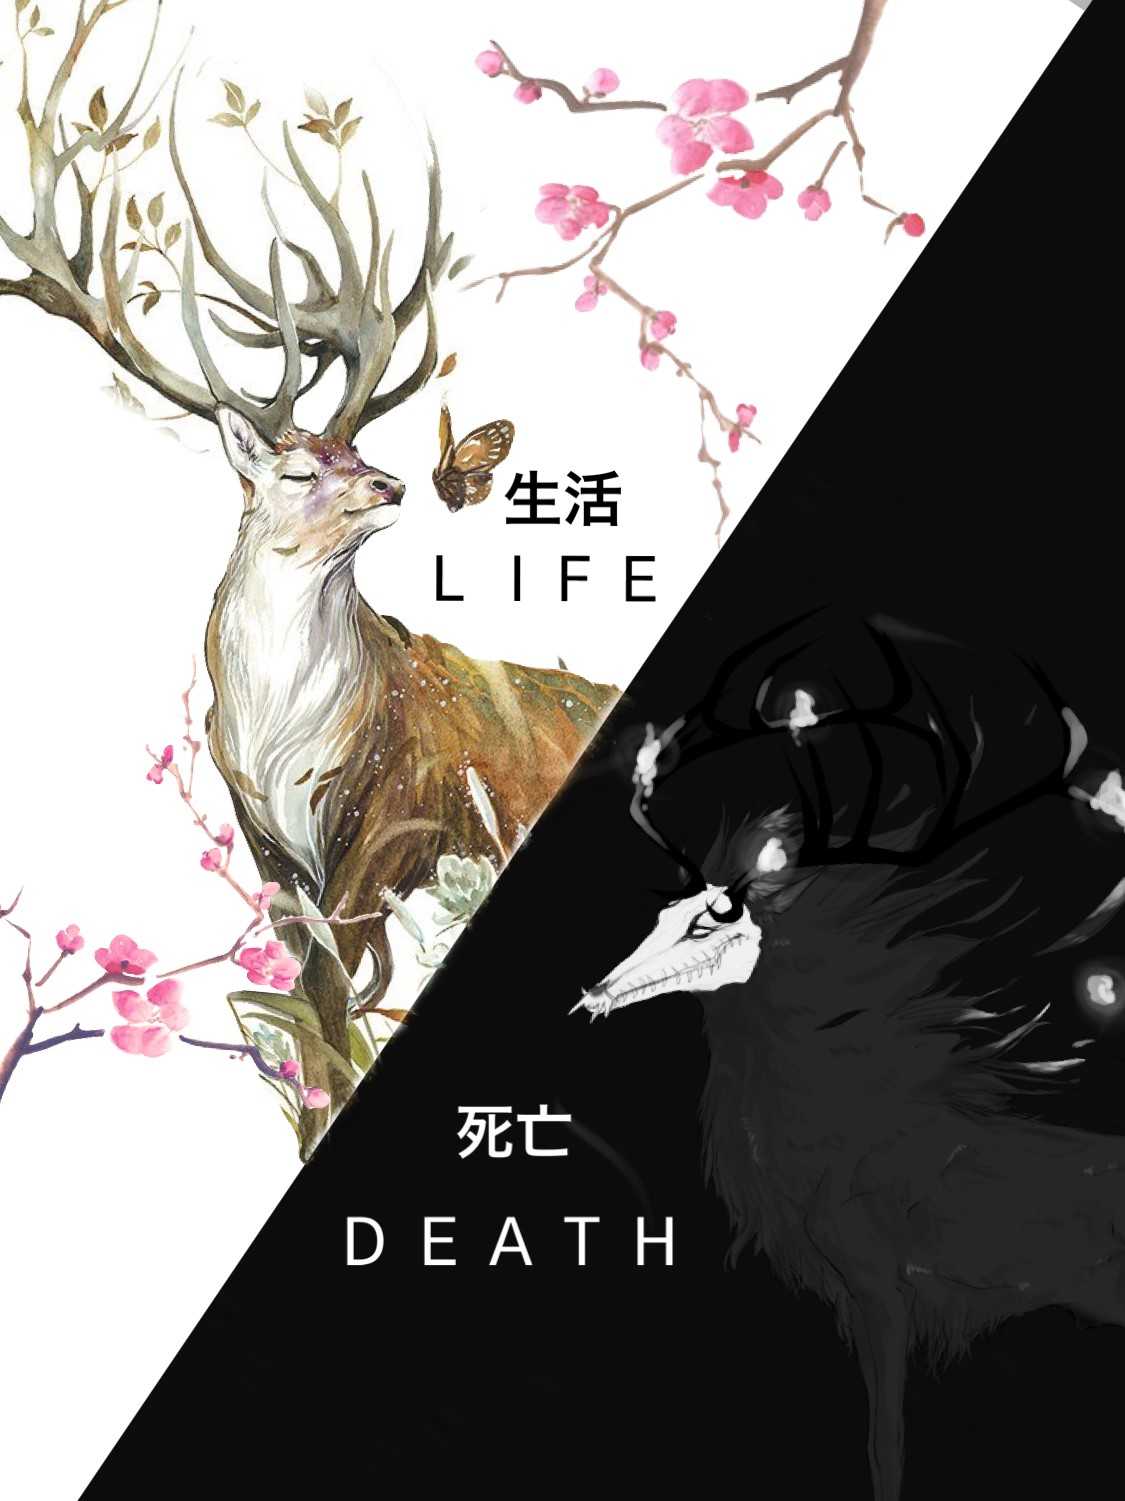 Life Death IPhone Wallpaper  IPhone Wallpapers  iPhone Wallpapers